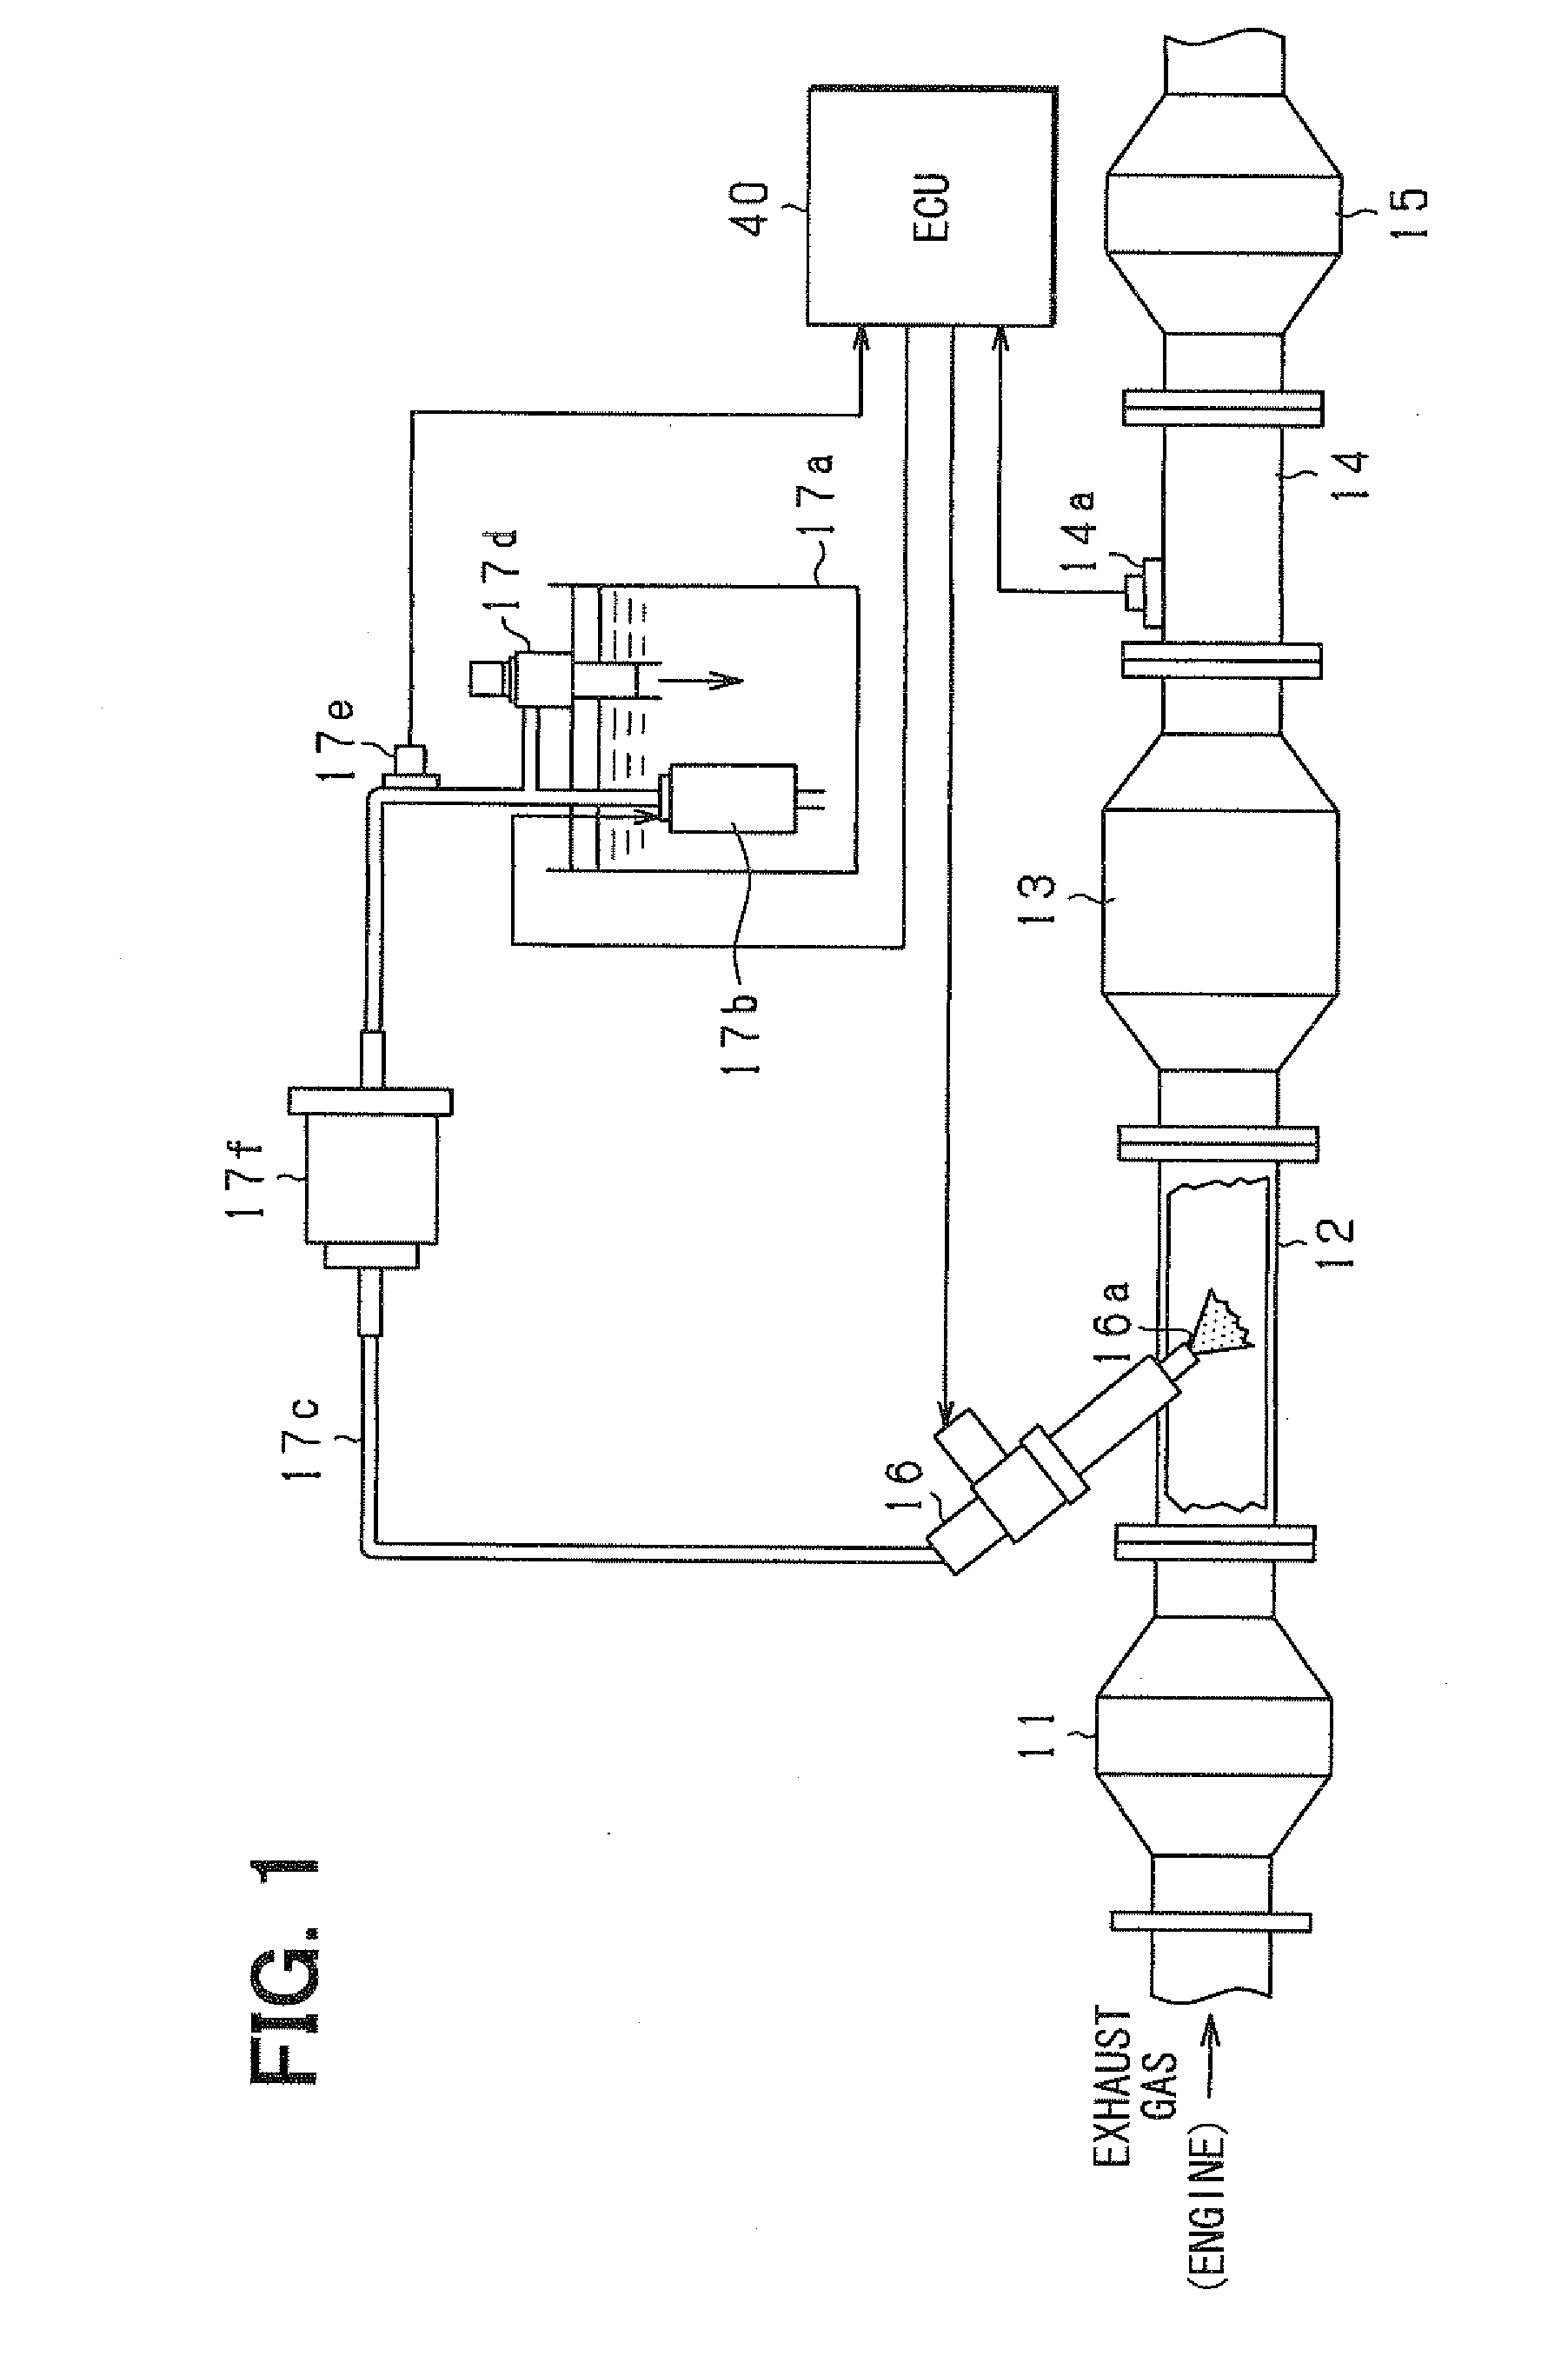 Addition-amount controller for exhaust gas purifying agent and exhaust emission control system